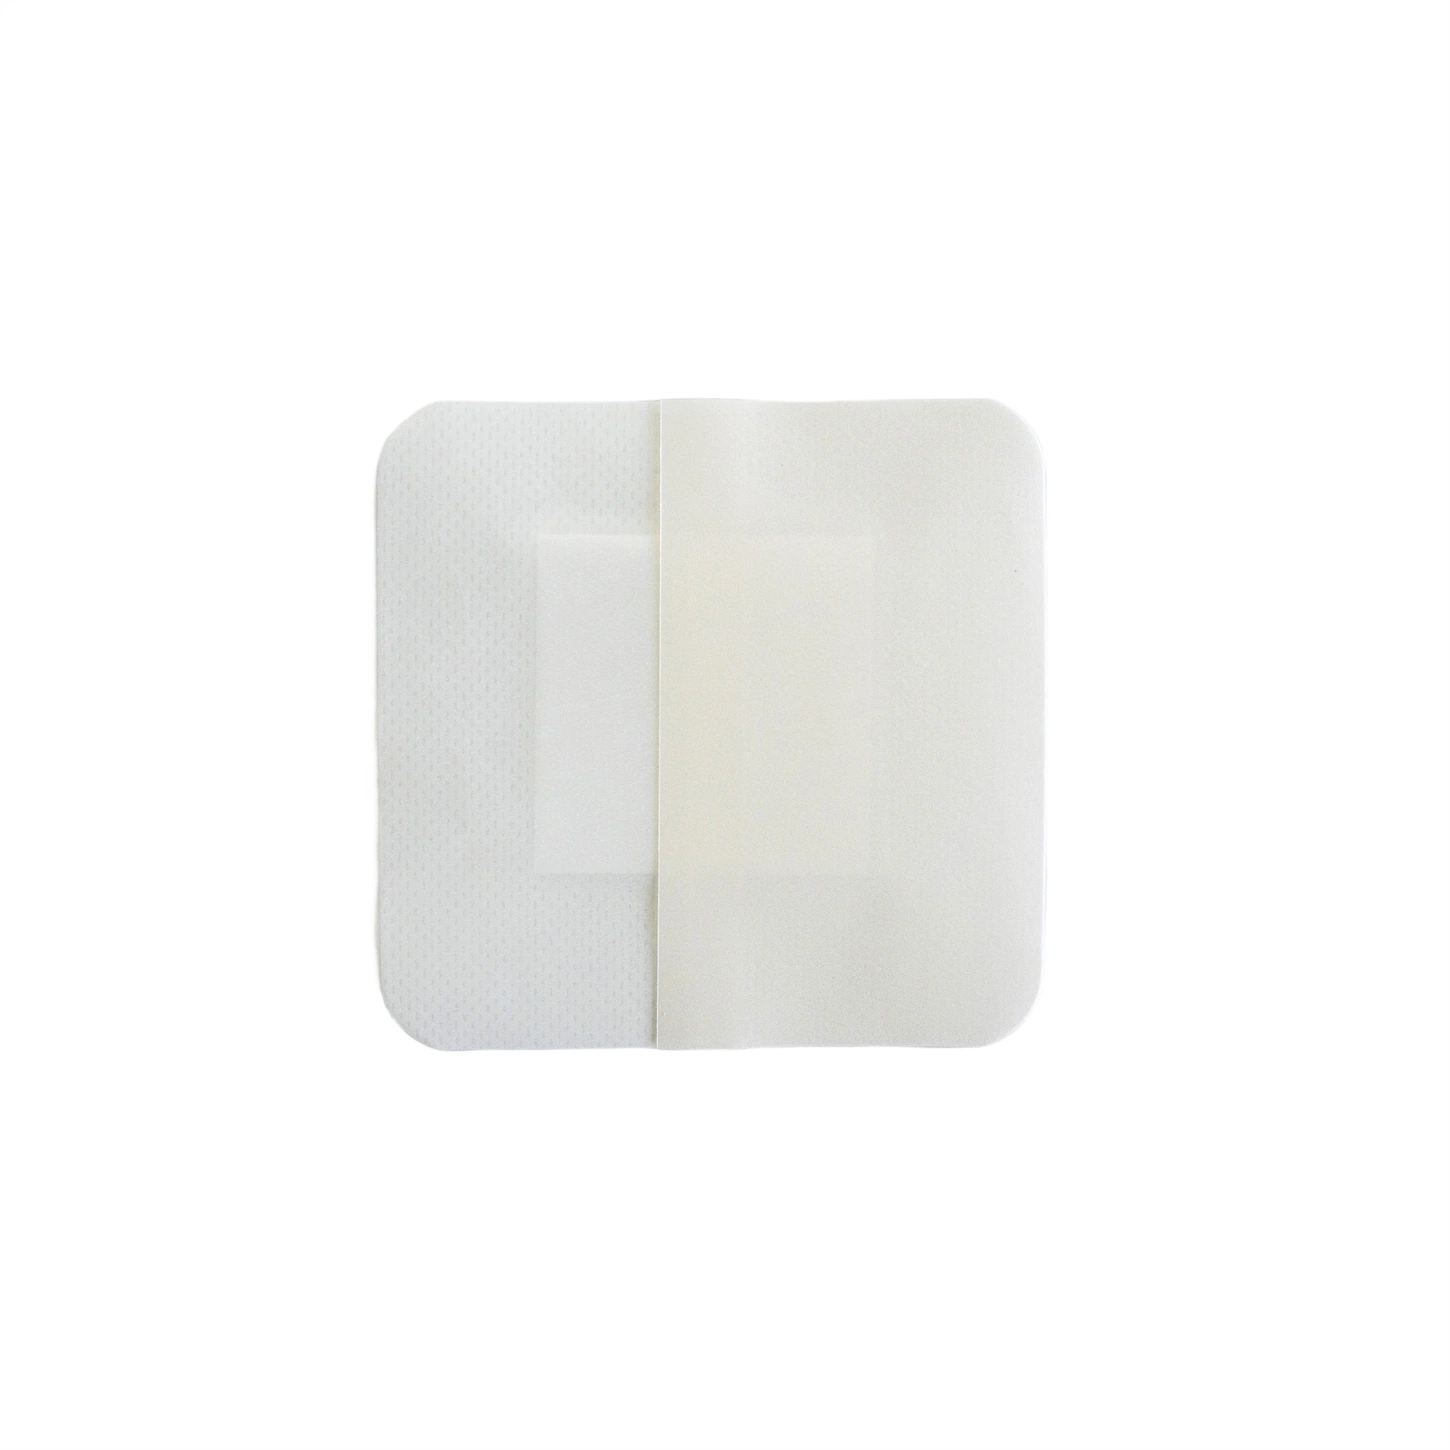 Medical Disposable Breathable Waterproof Adhesive Spunlace Nonwoven Fabric Wound Dressing